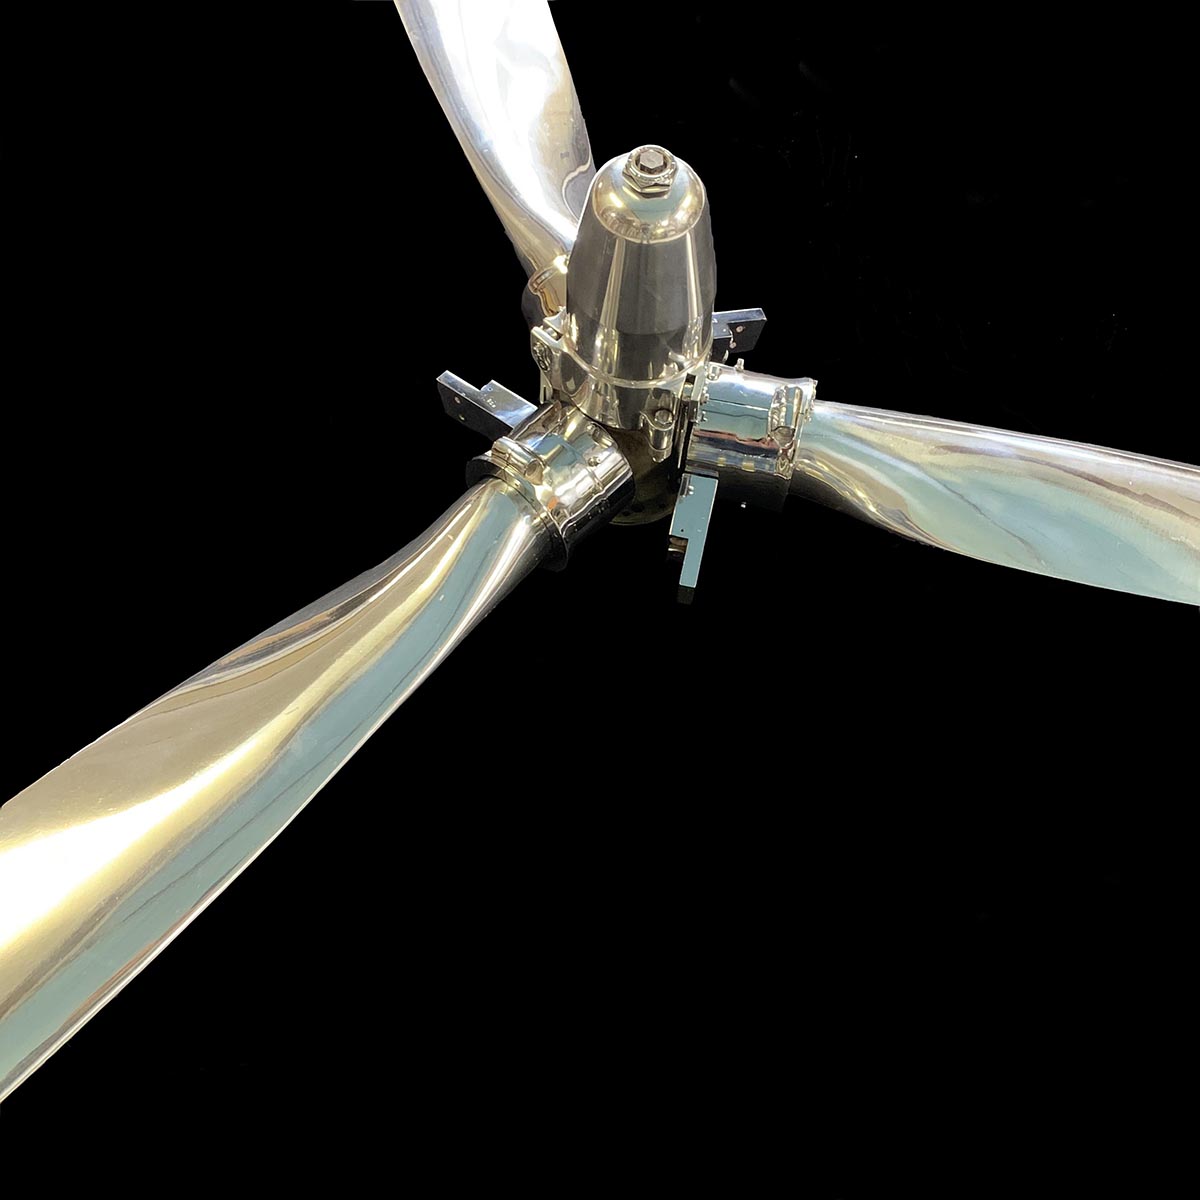 Three-bladed Hartzell propeller and hub that was polished and prepared for display purposes.